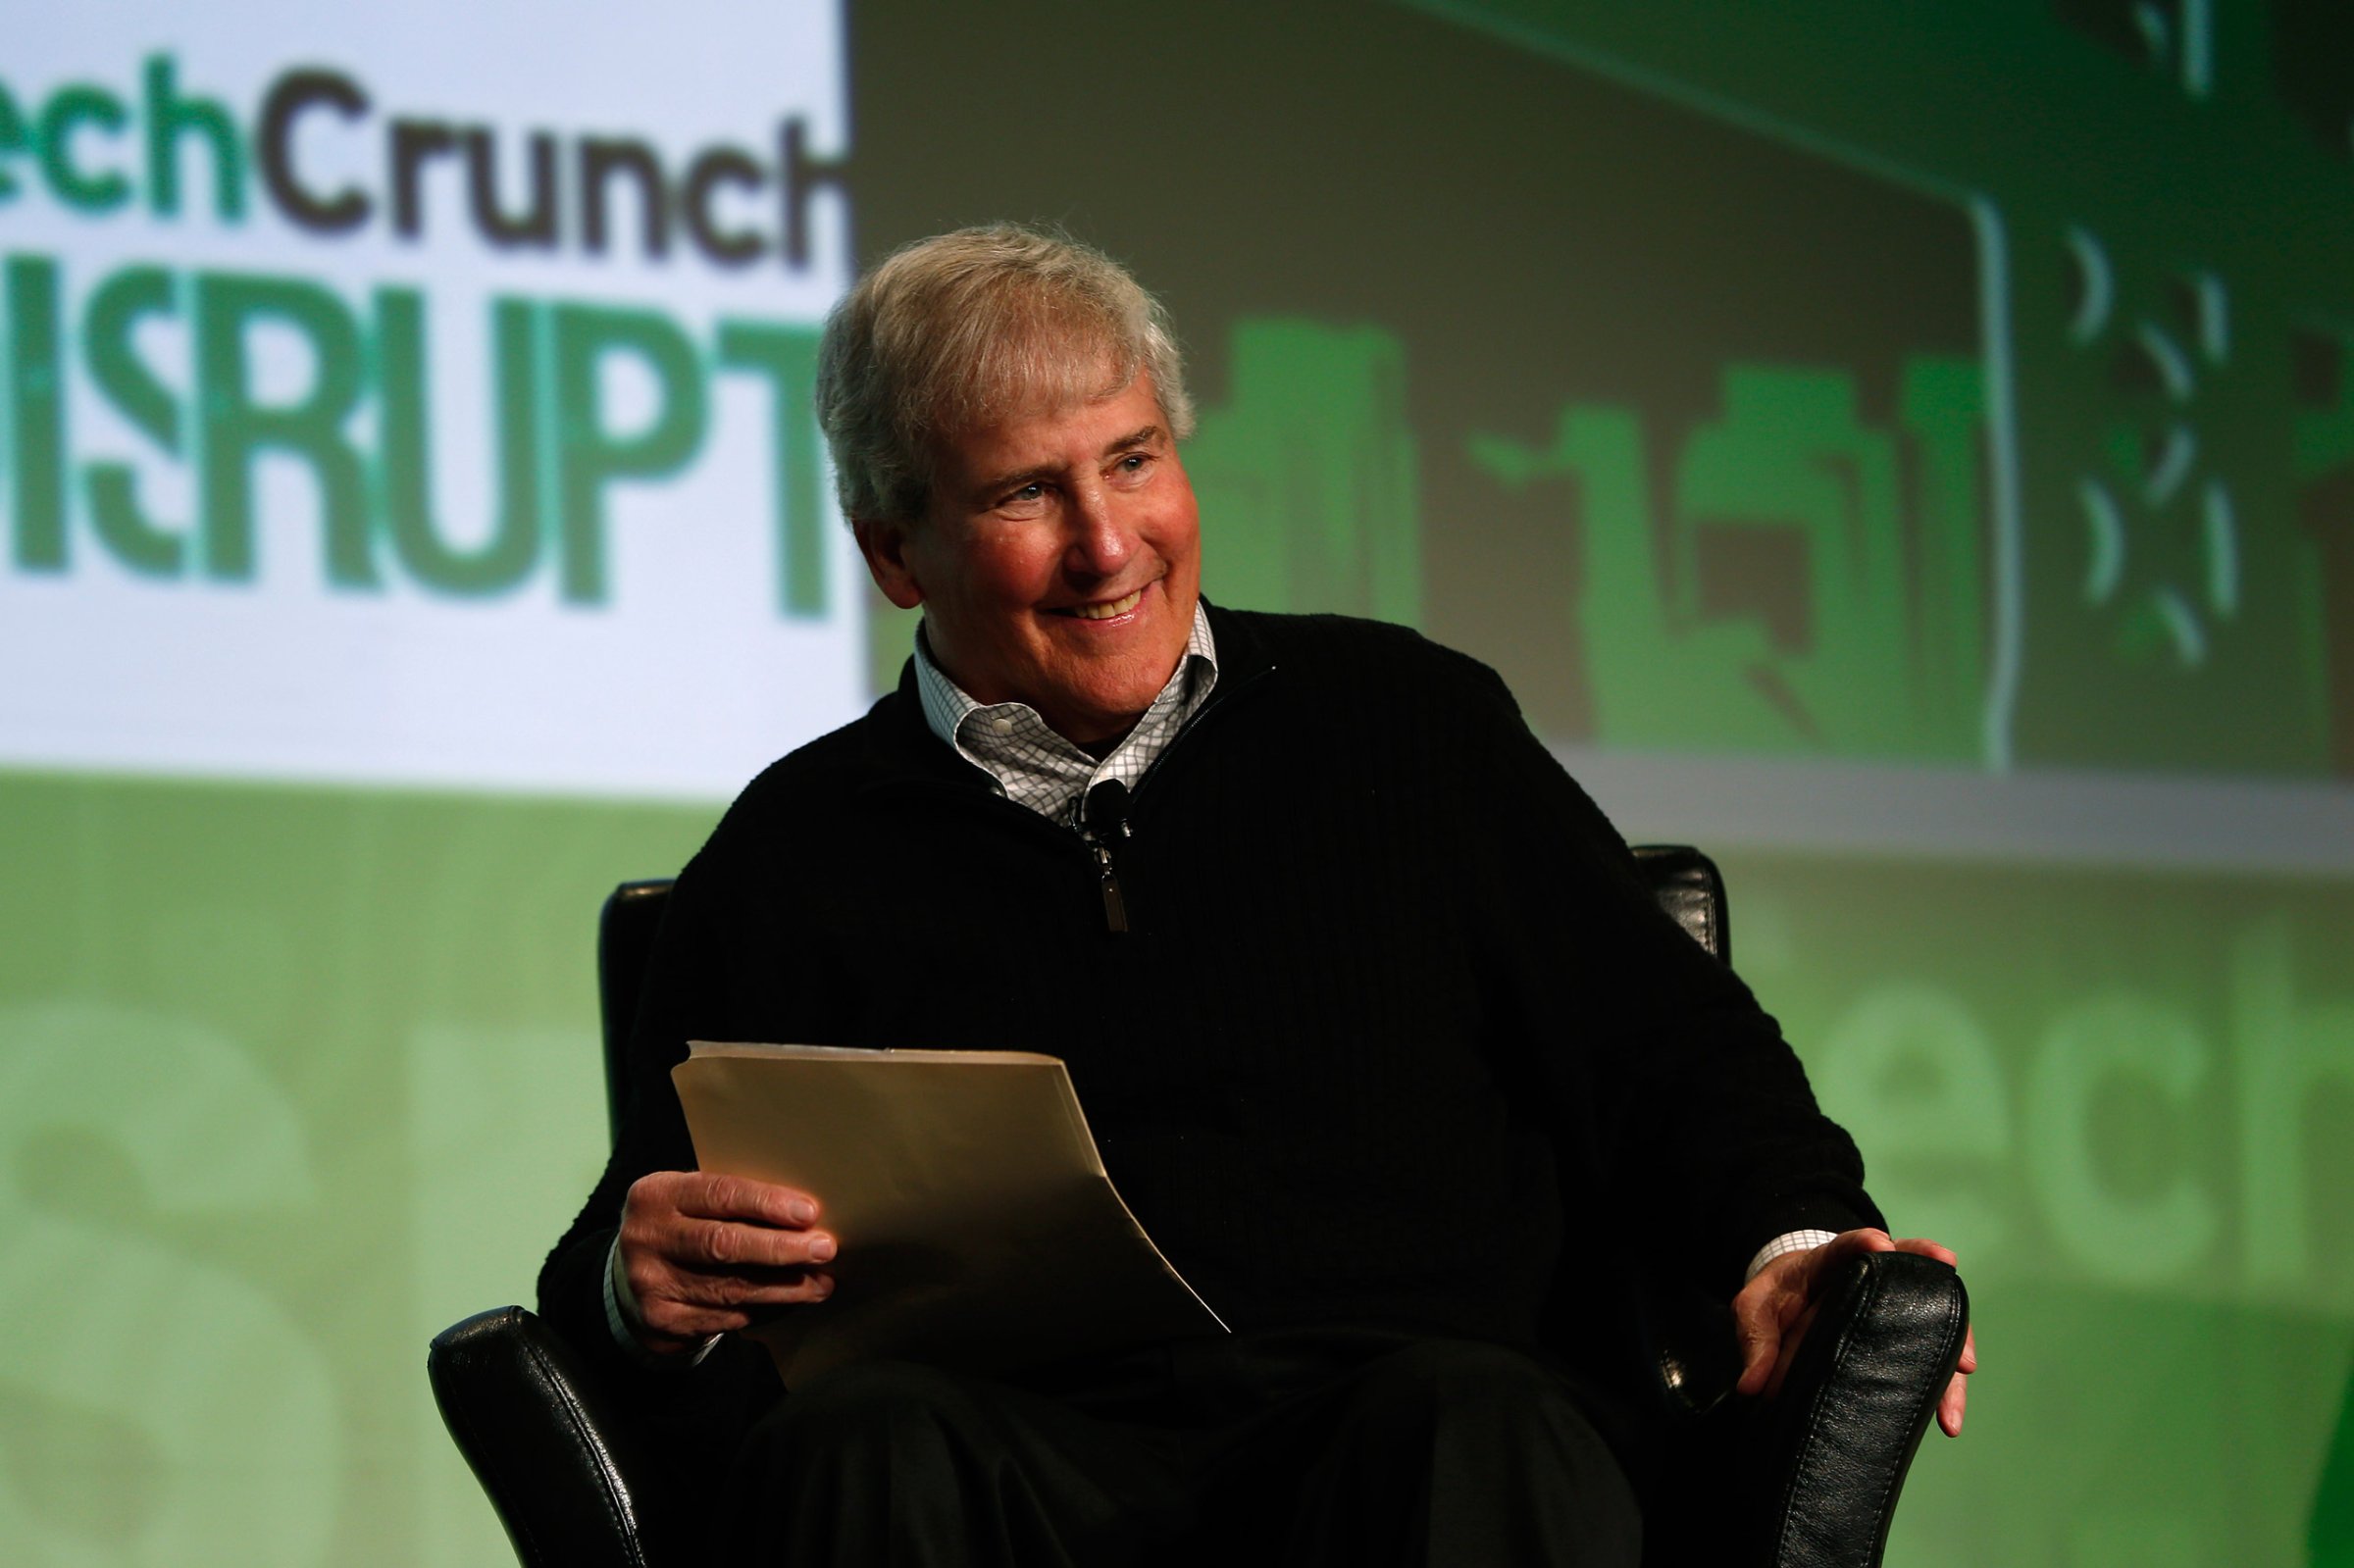 Bill Campbell, chairman of the board and former chief executive of Intuit Inc., smiles as he moderates a fireside chat with Ben Horowitz of Andreessen Horowitz during day one of TechCrunch Disrupt SF 2012 event at the San Francisco Design Center Concourse in San Francisco, California September 10, 2012. REUTERS/Stephen Lam (UNITED STATES - Tags: BUSINESS SCIENCE TECHNOLOGY) - RTR37SAM